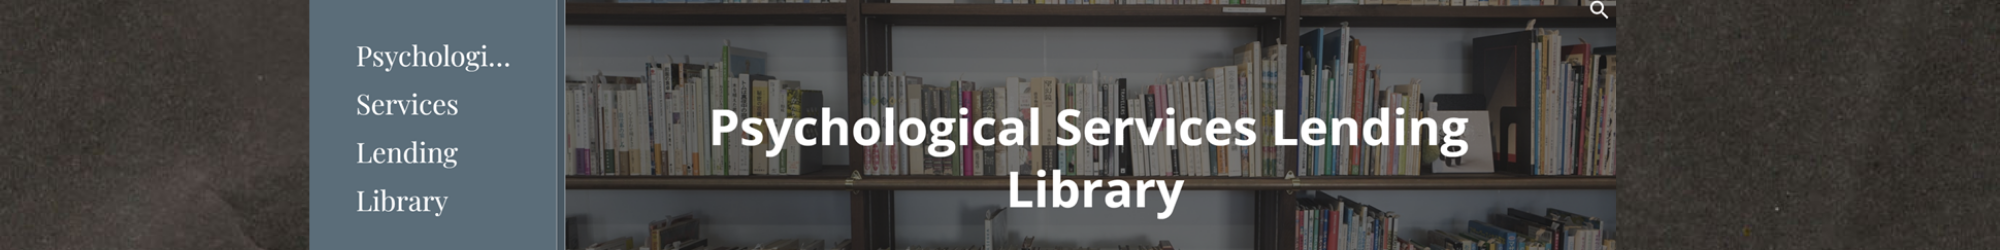 Psychological Services Lending Library